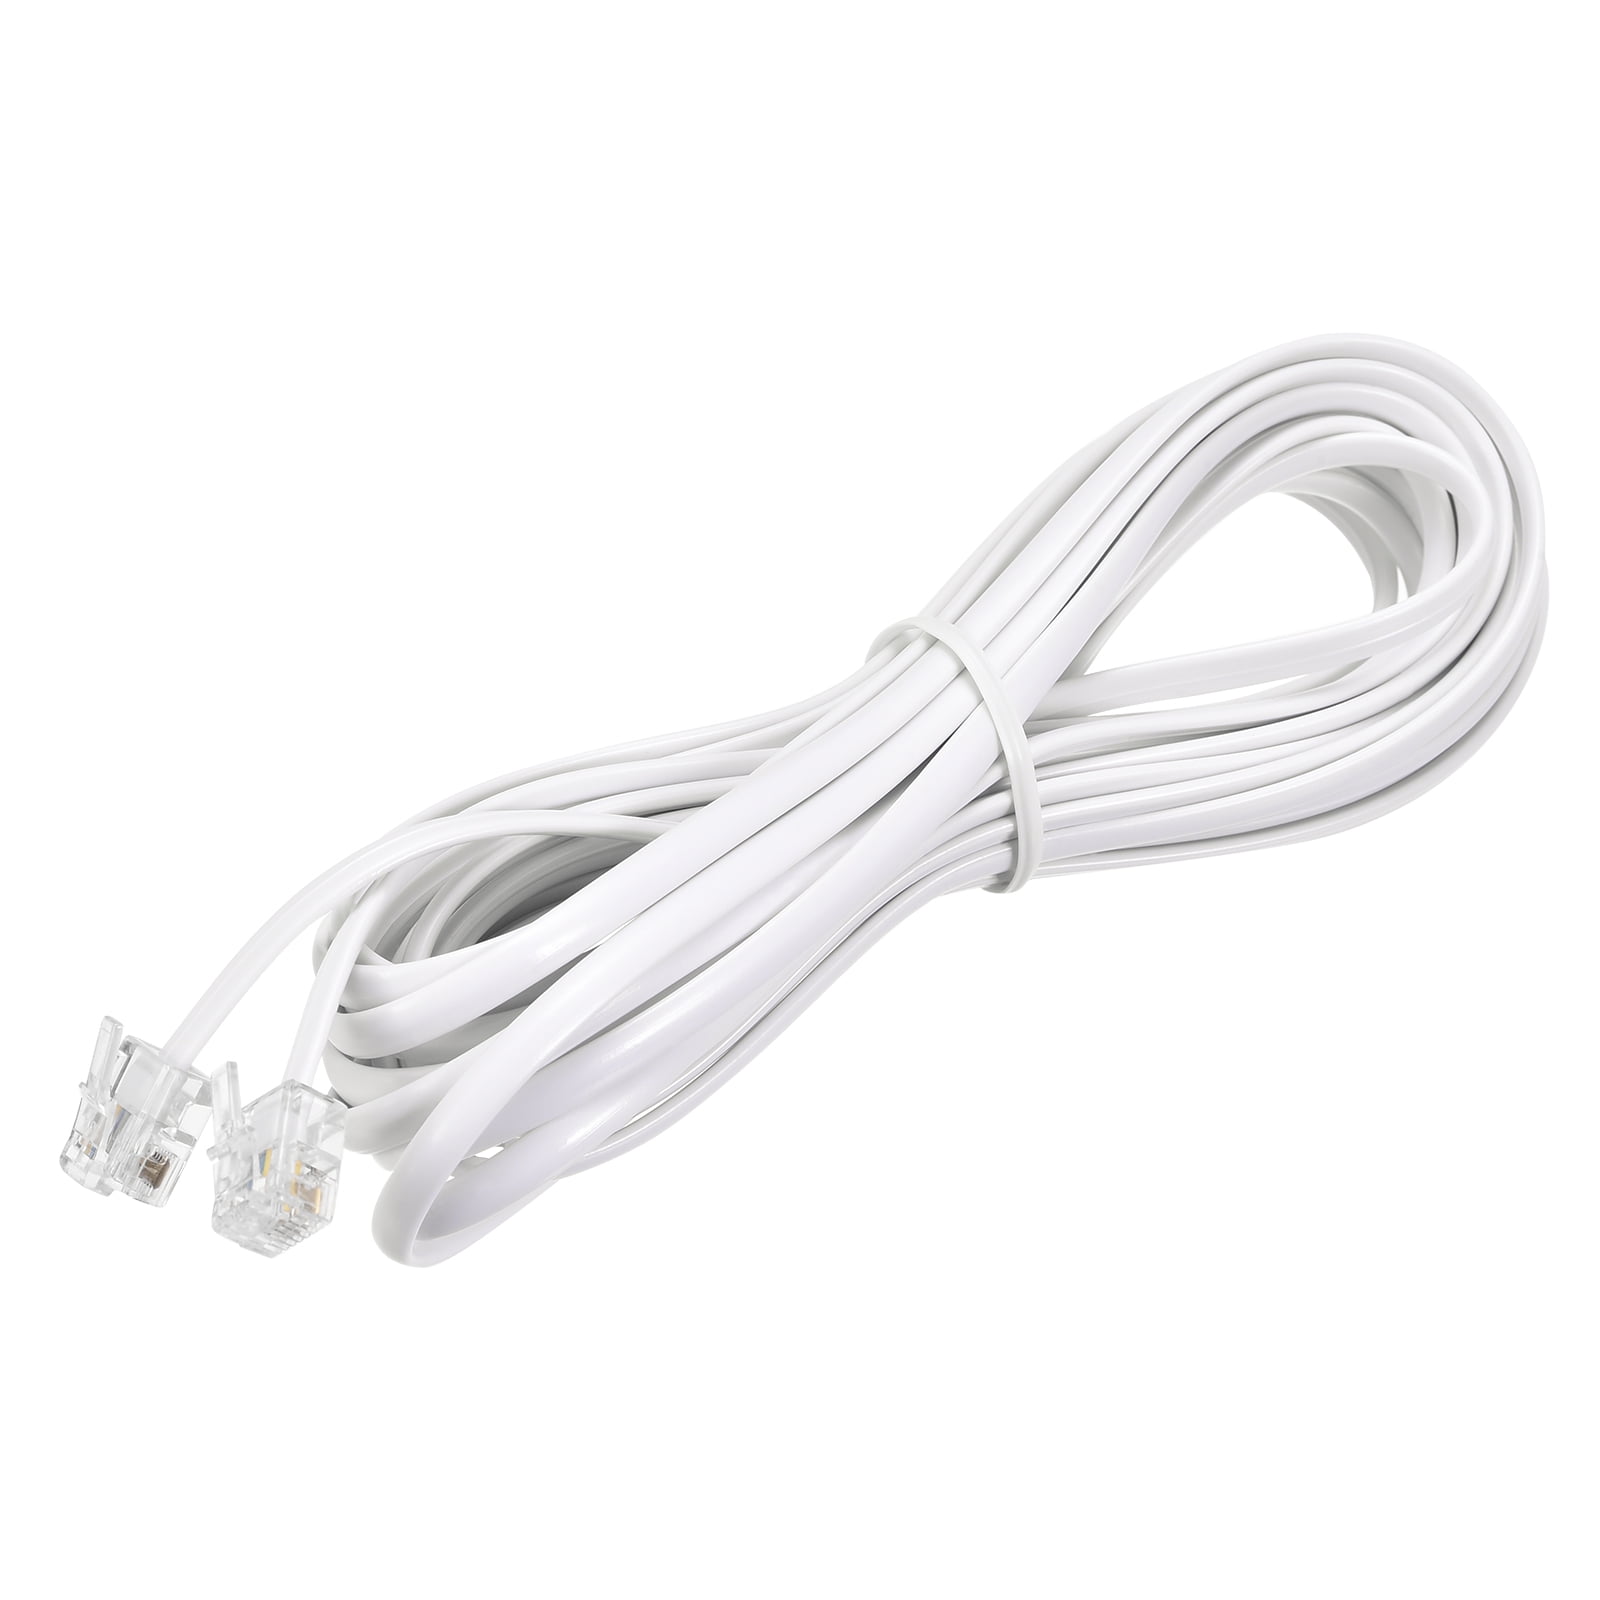 15 ft. Telephone Extension Cord, with RJ11 (6P4C) Connectors, Works  w/Telephones, Fax Machines, Modems, Black (5-Pack)